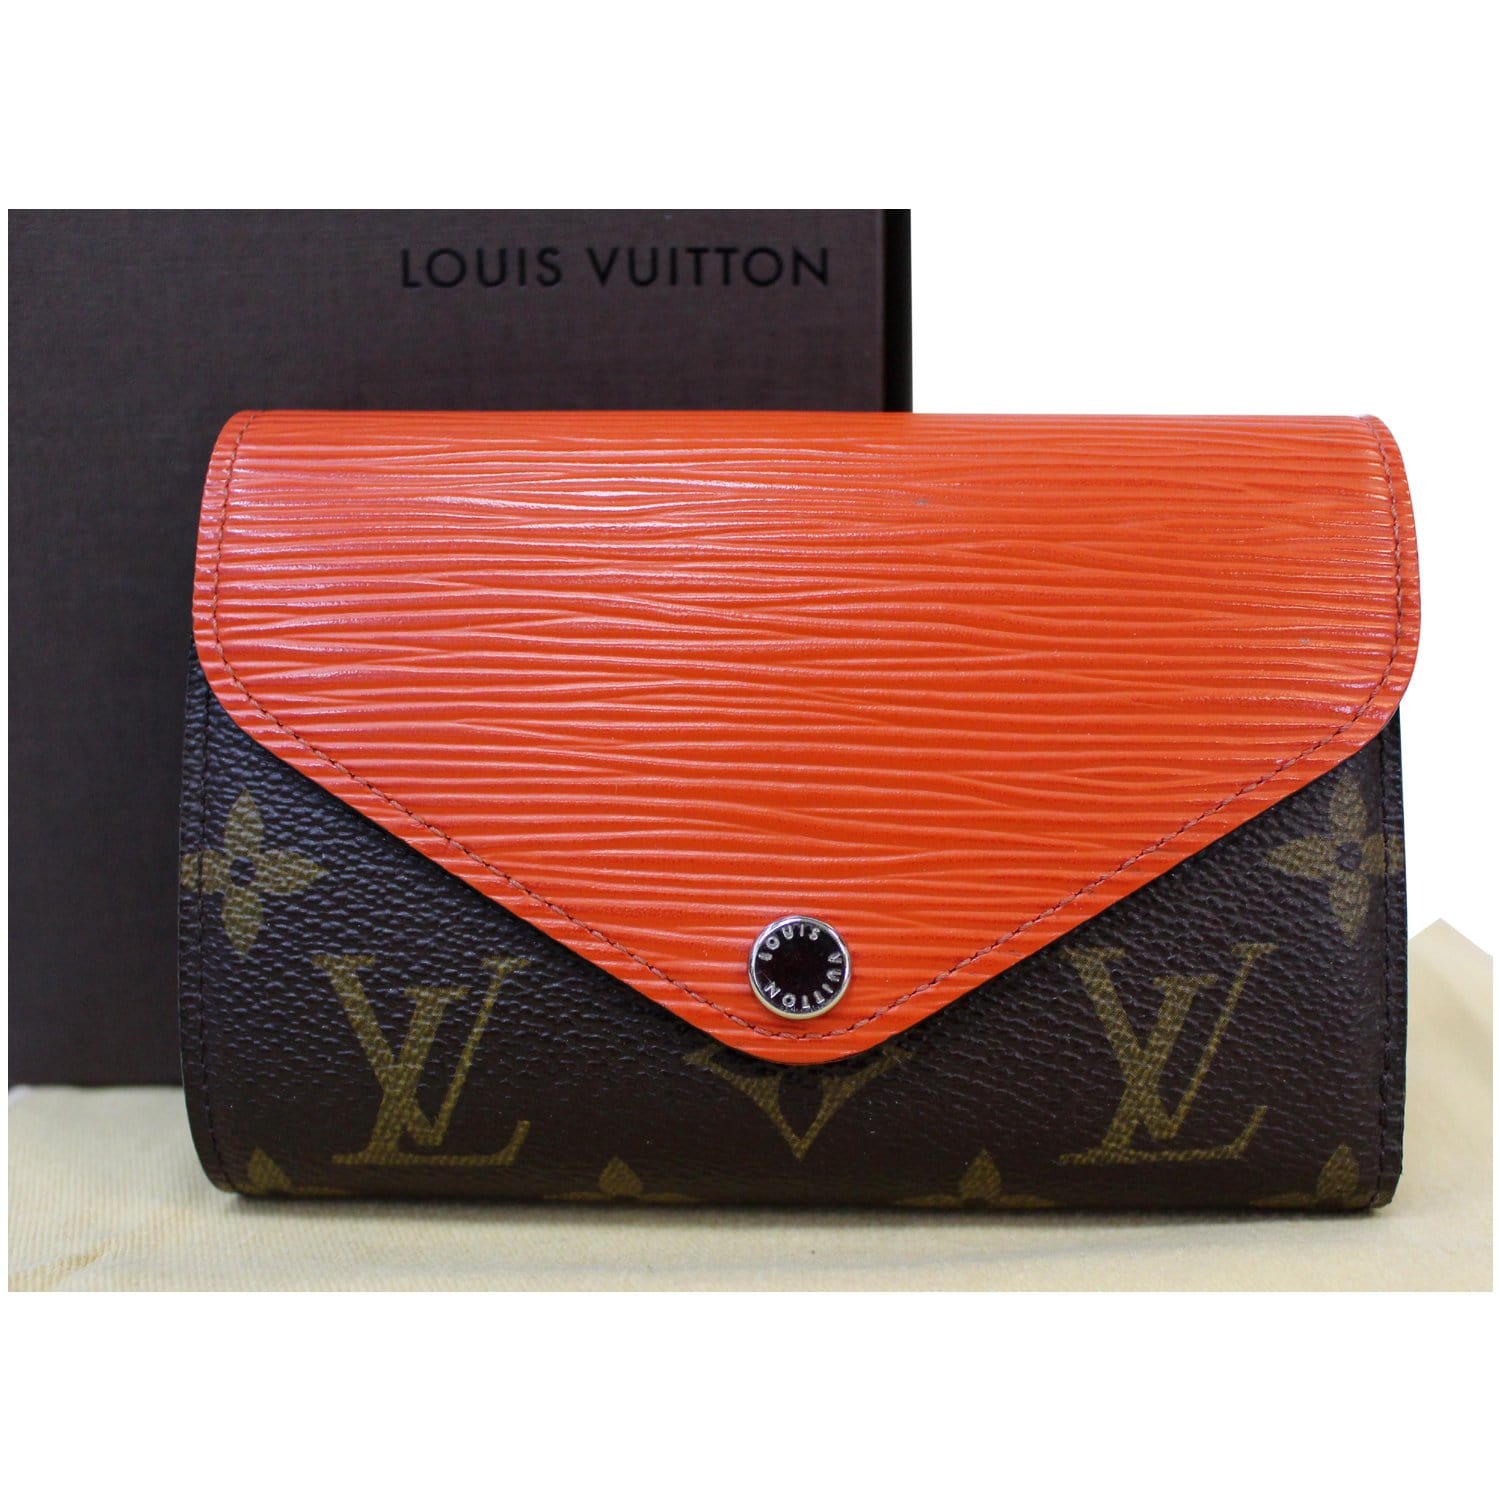 Sold at Auction: LOUIS VUITTON OANGE/ BROWN MARY LOU WALLET